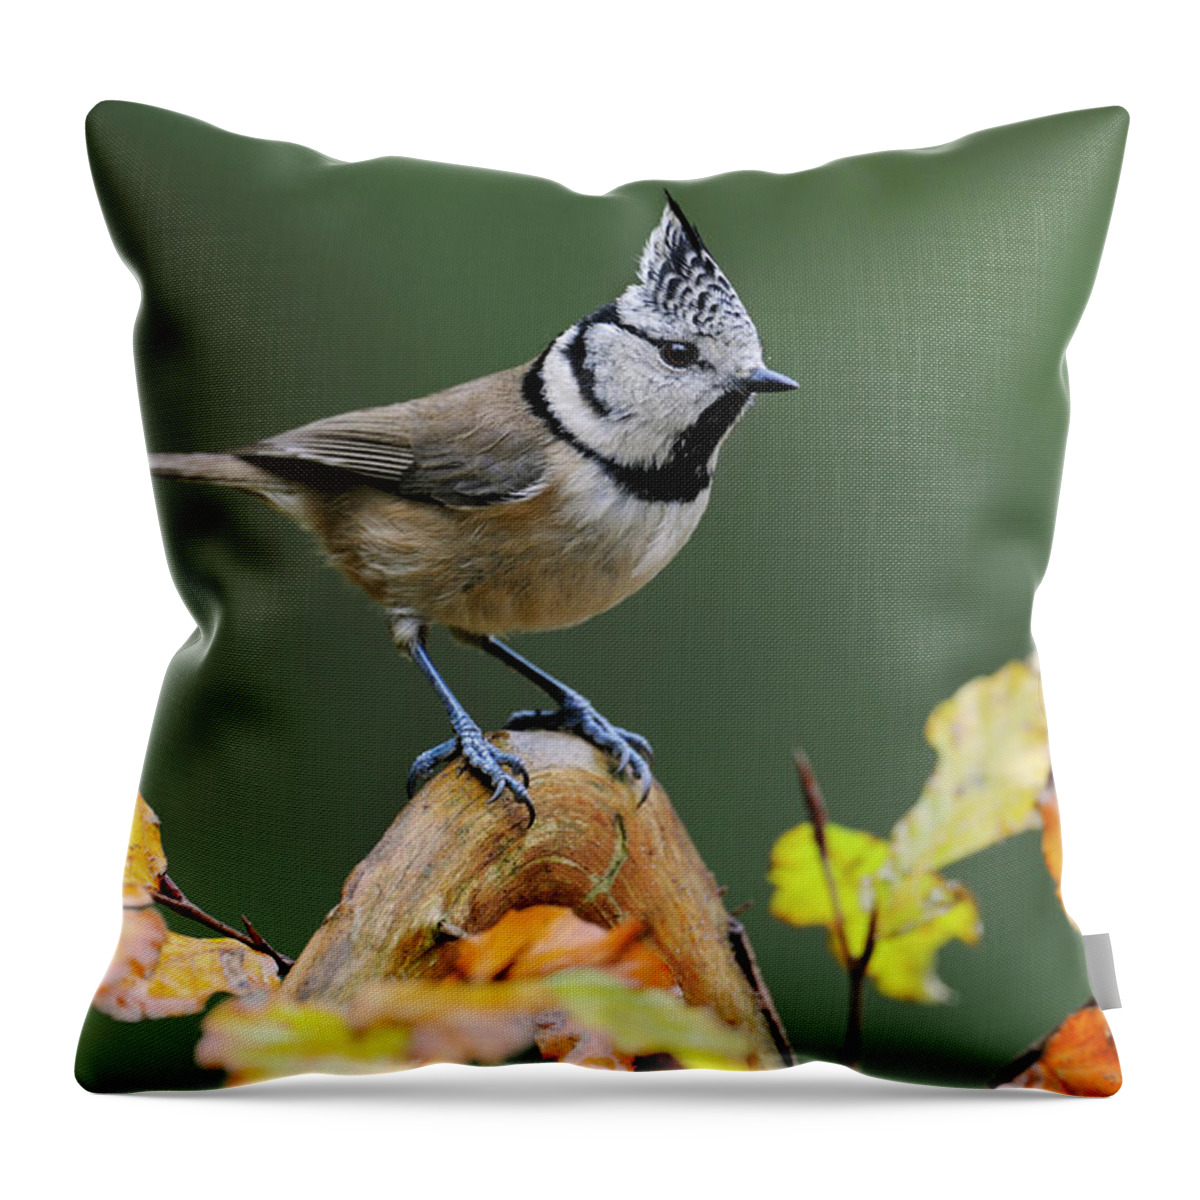 Fn Throw Pillow featuring the photograph Crested Tit Parus Cristatus, Veluwe by Do Van Dijck